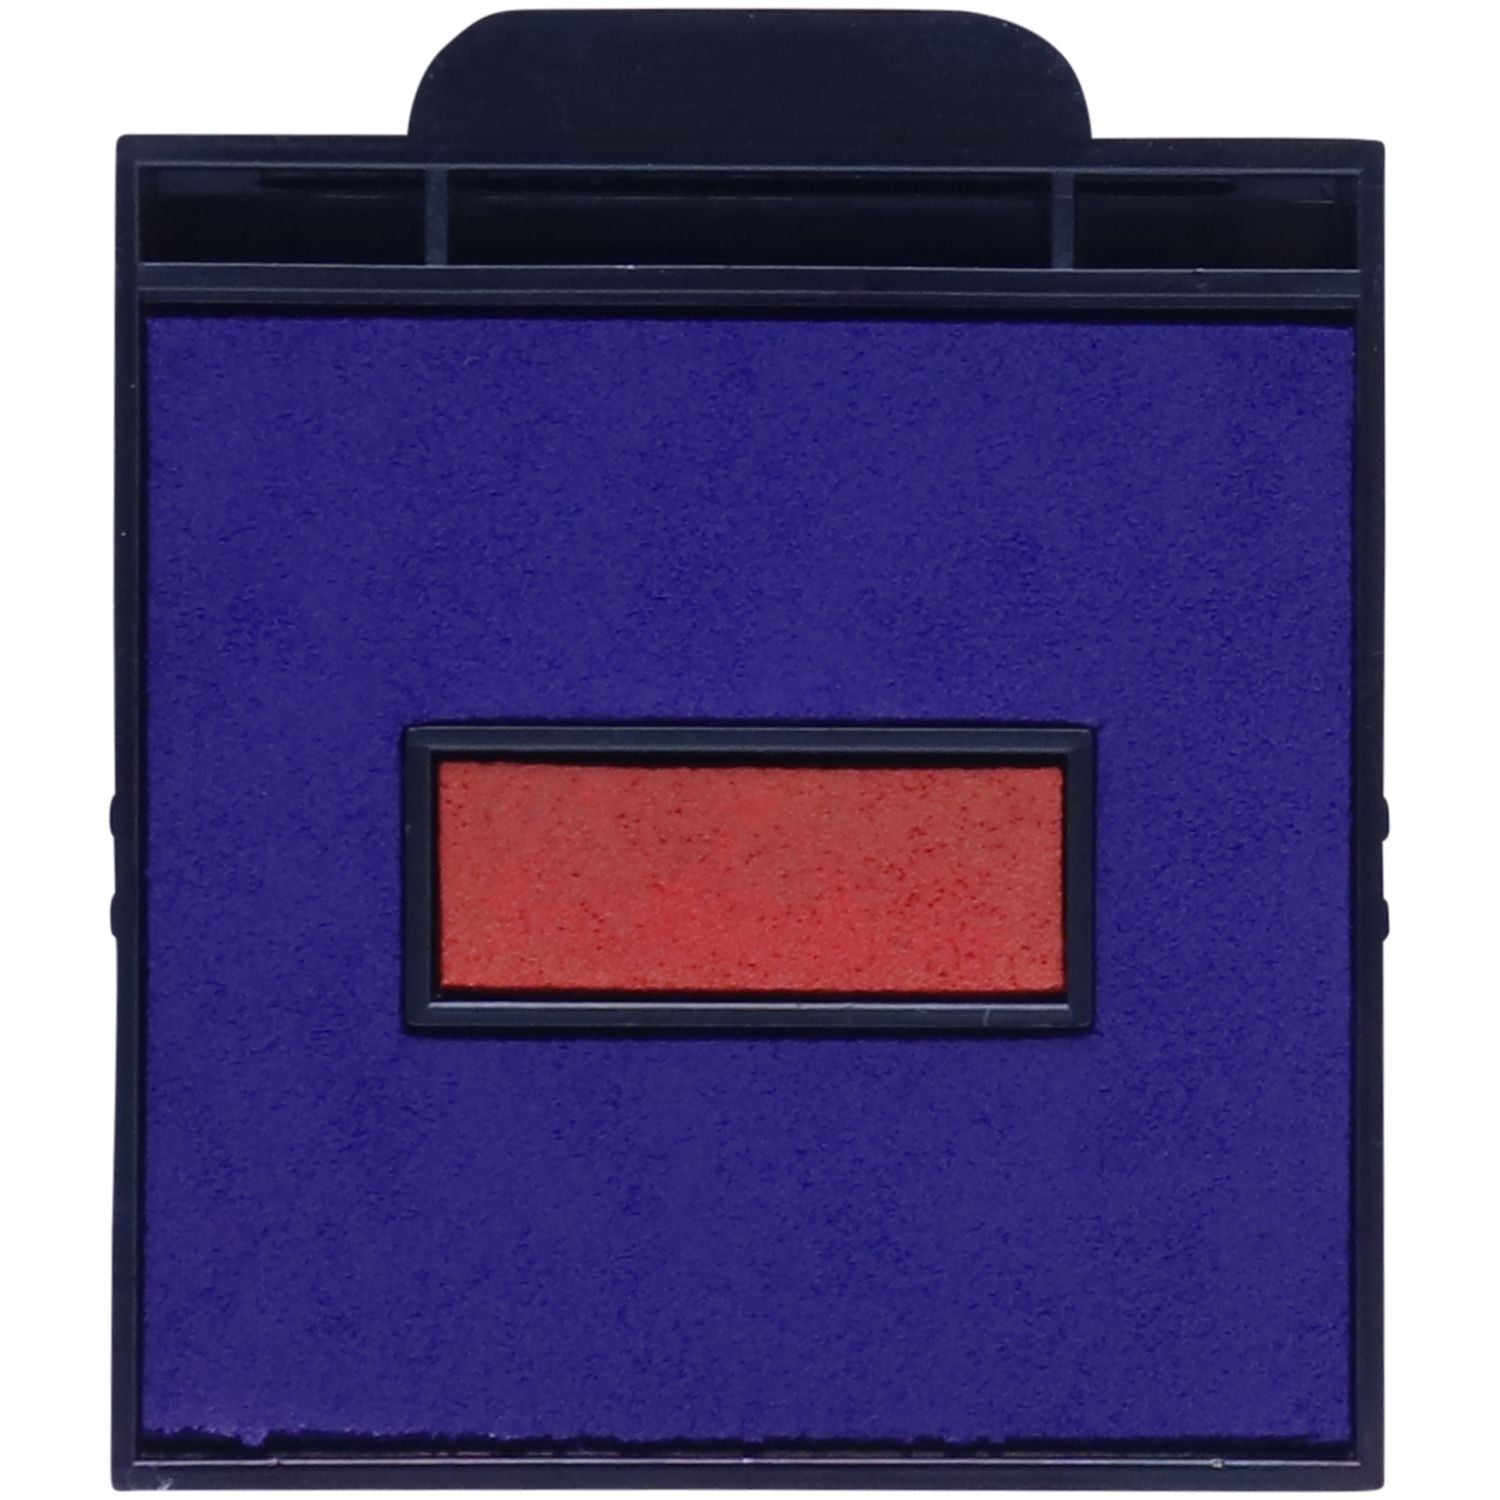 Two Color Replacement Ink Pad For Hm 6105 Blue Red